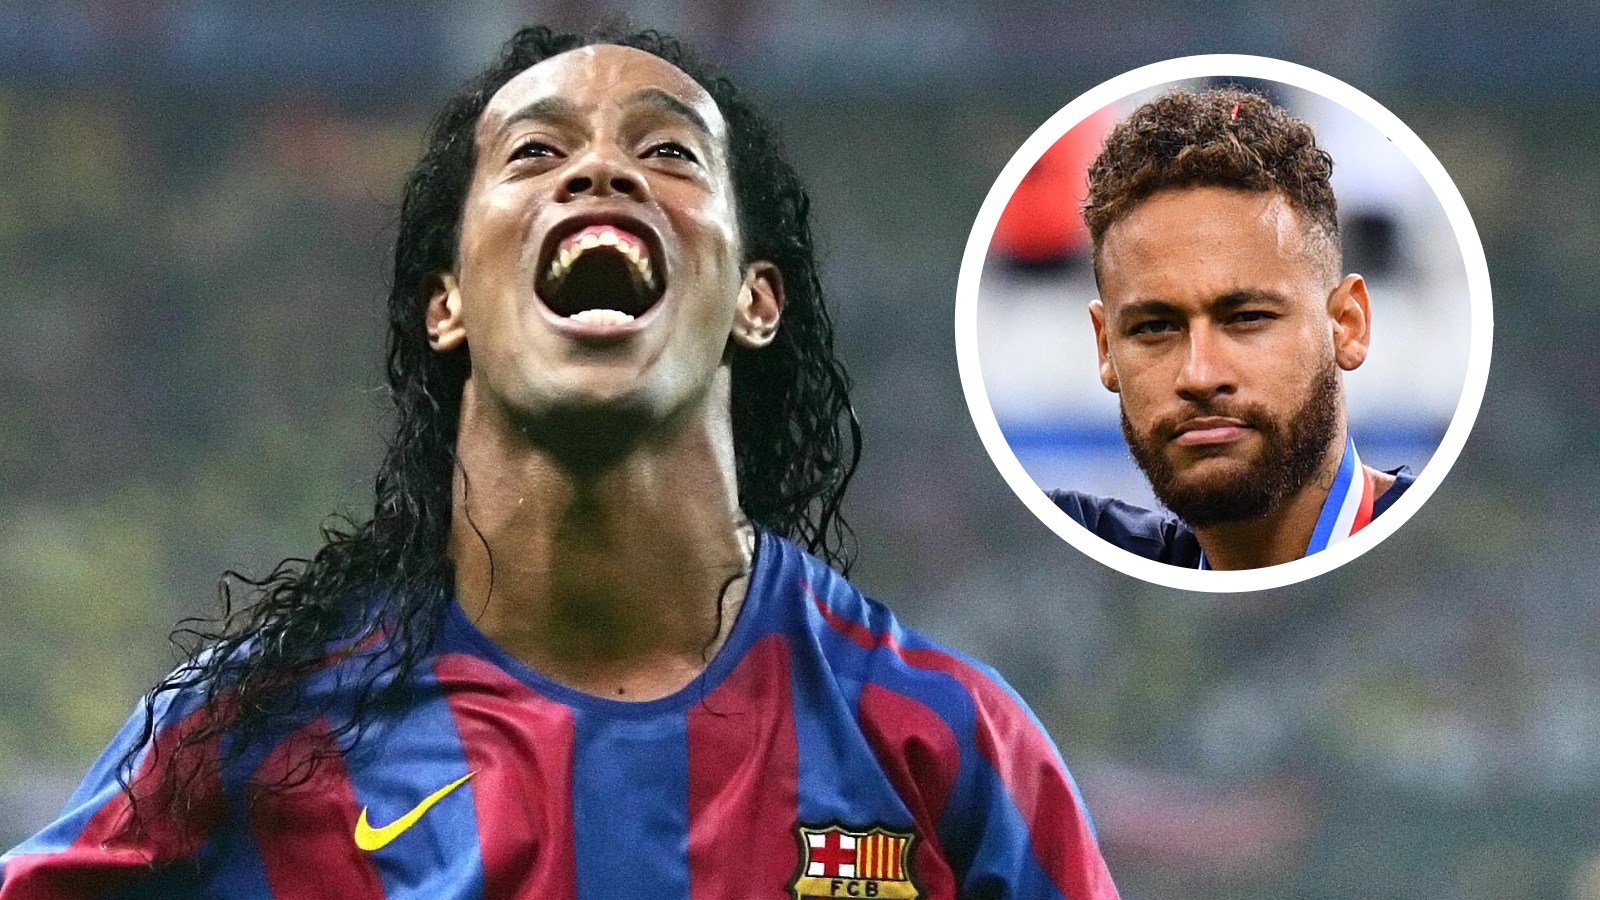 'If Neymar is worth £200m, then Ronaldinho would have been priceless!'